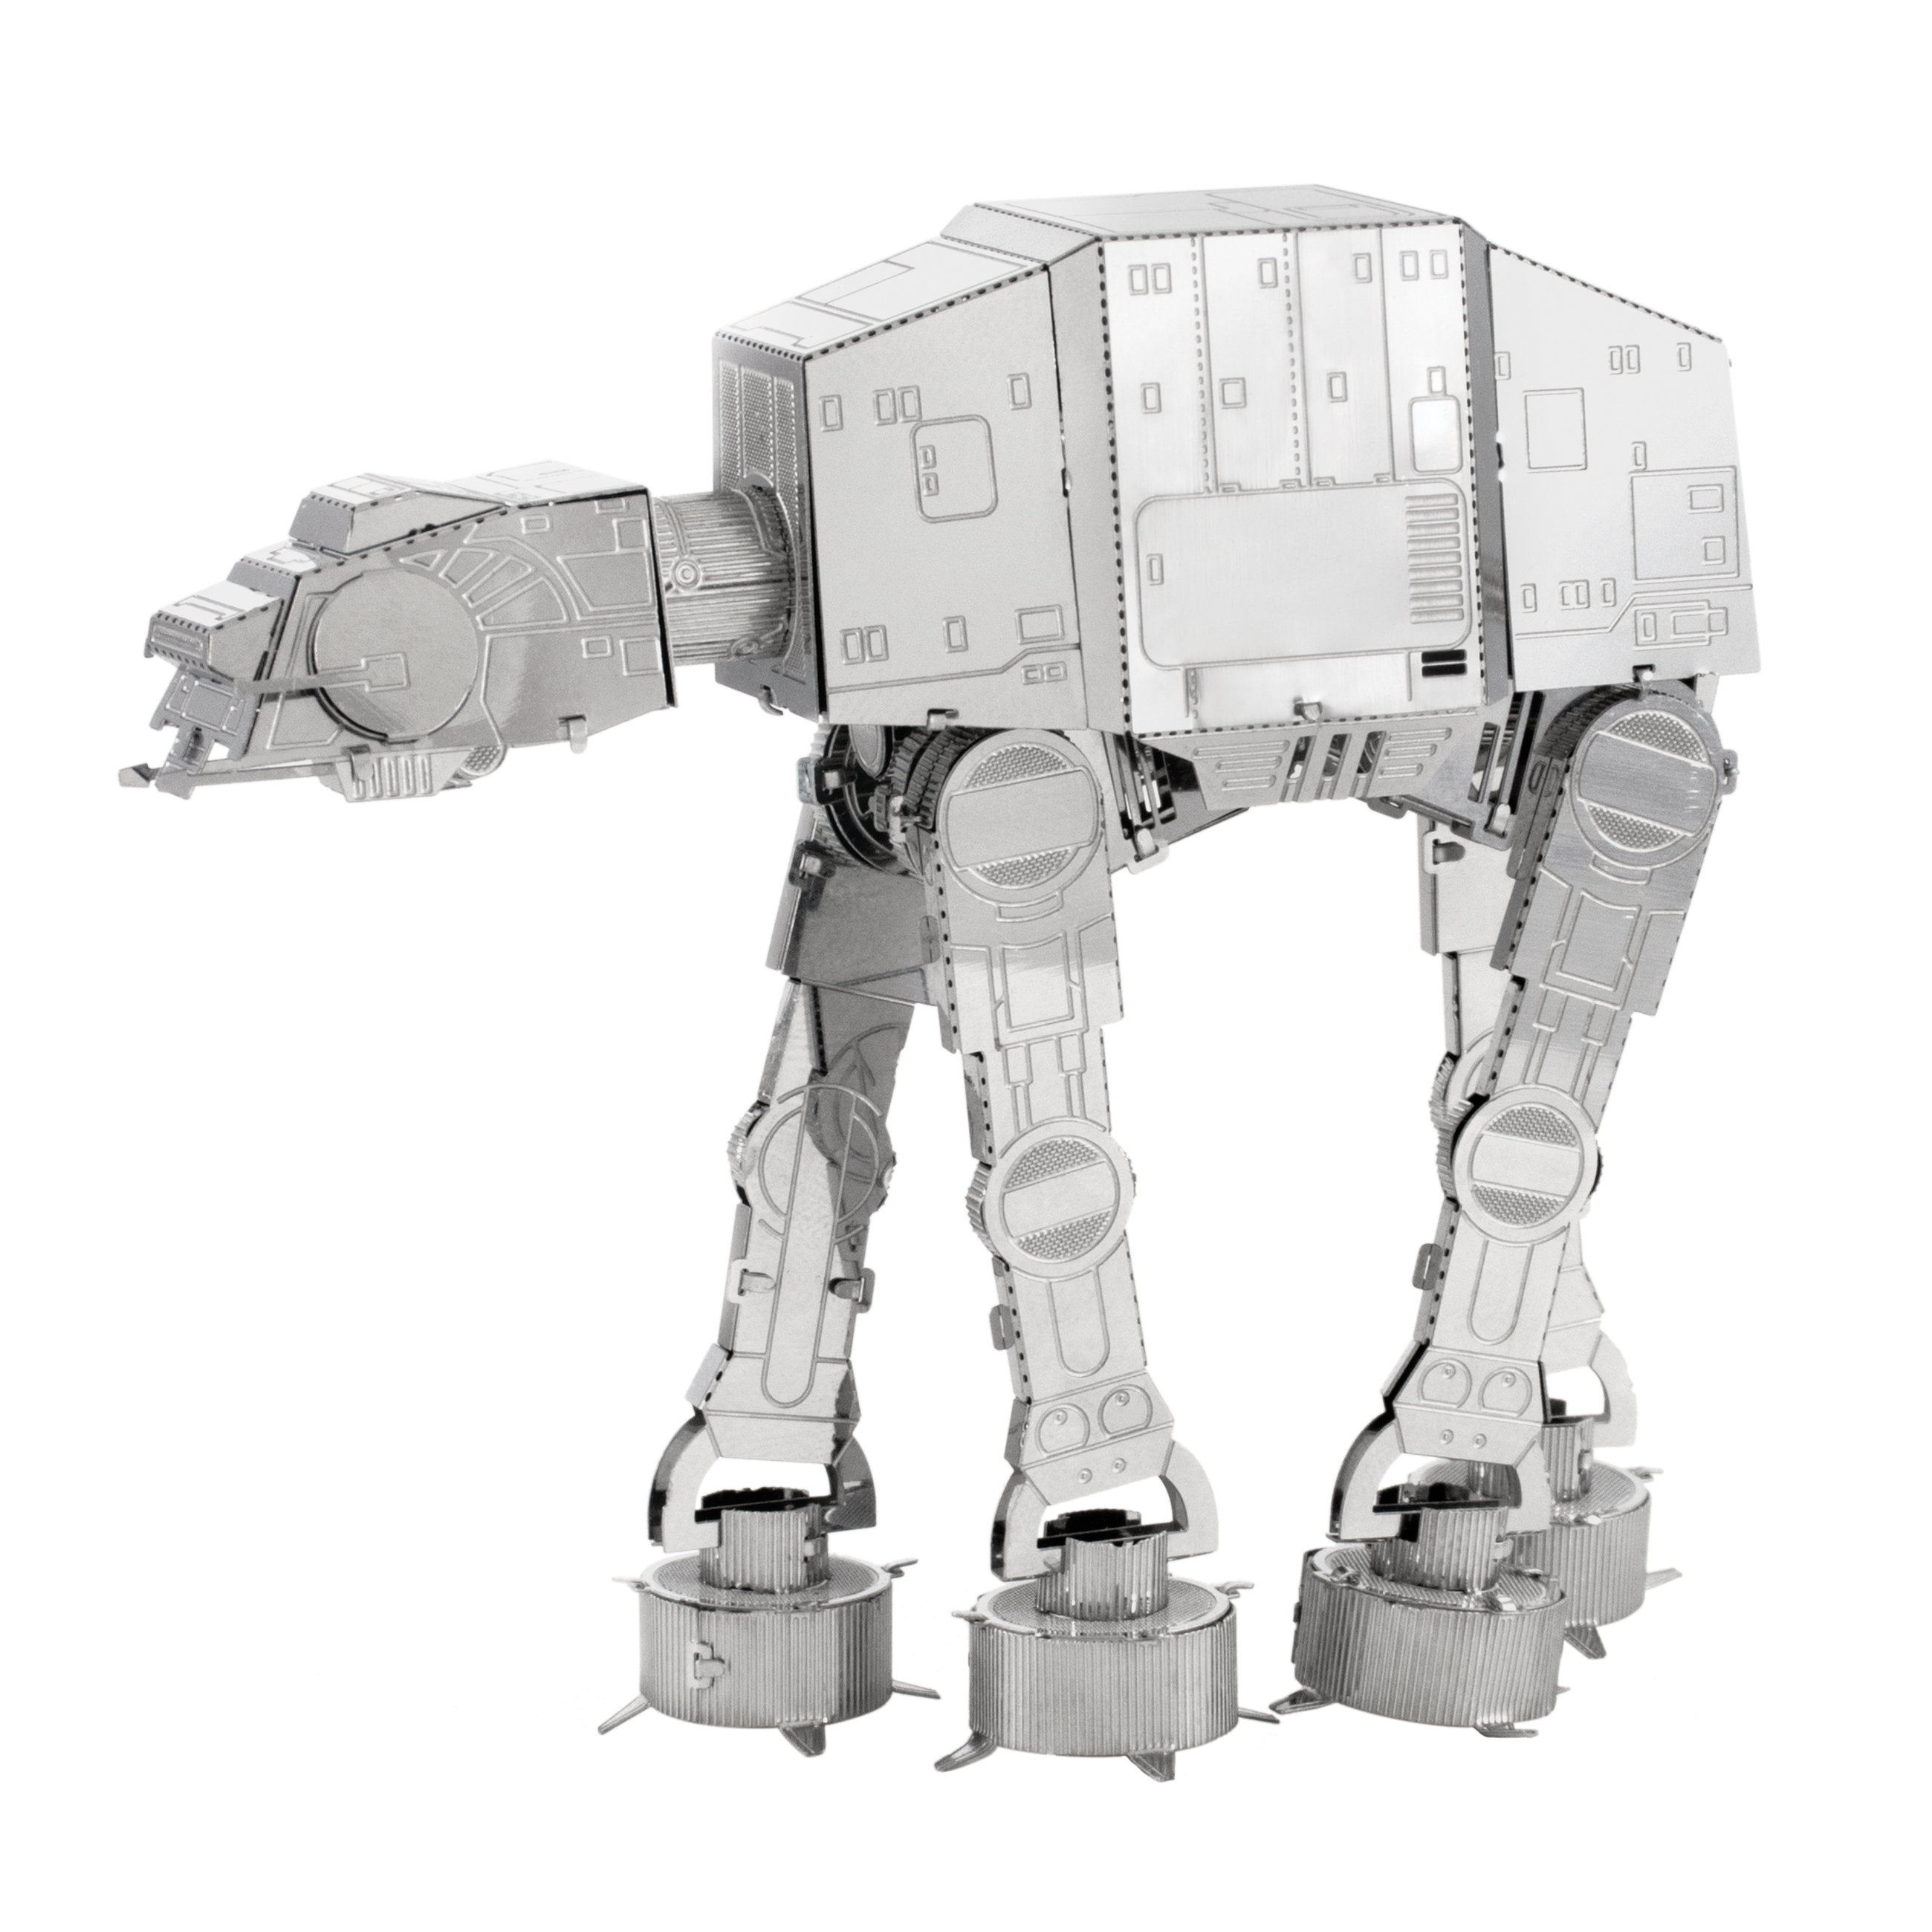 Fascinations Toys & Gifts Metal Earth 3D Laser Cut Model - Star Wars: AT-AT